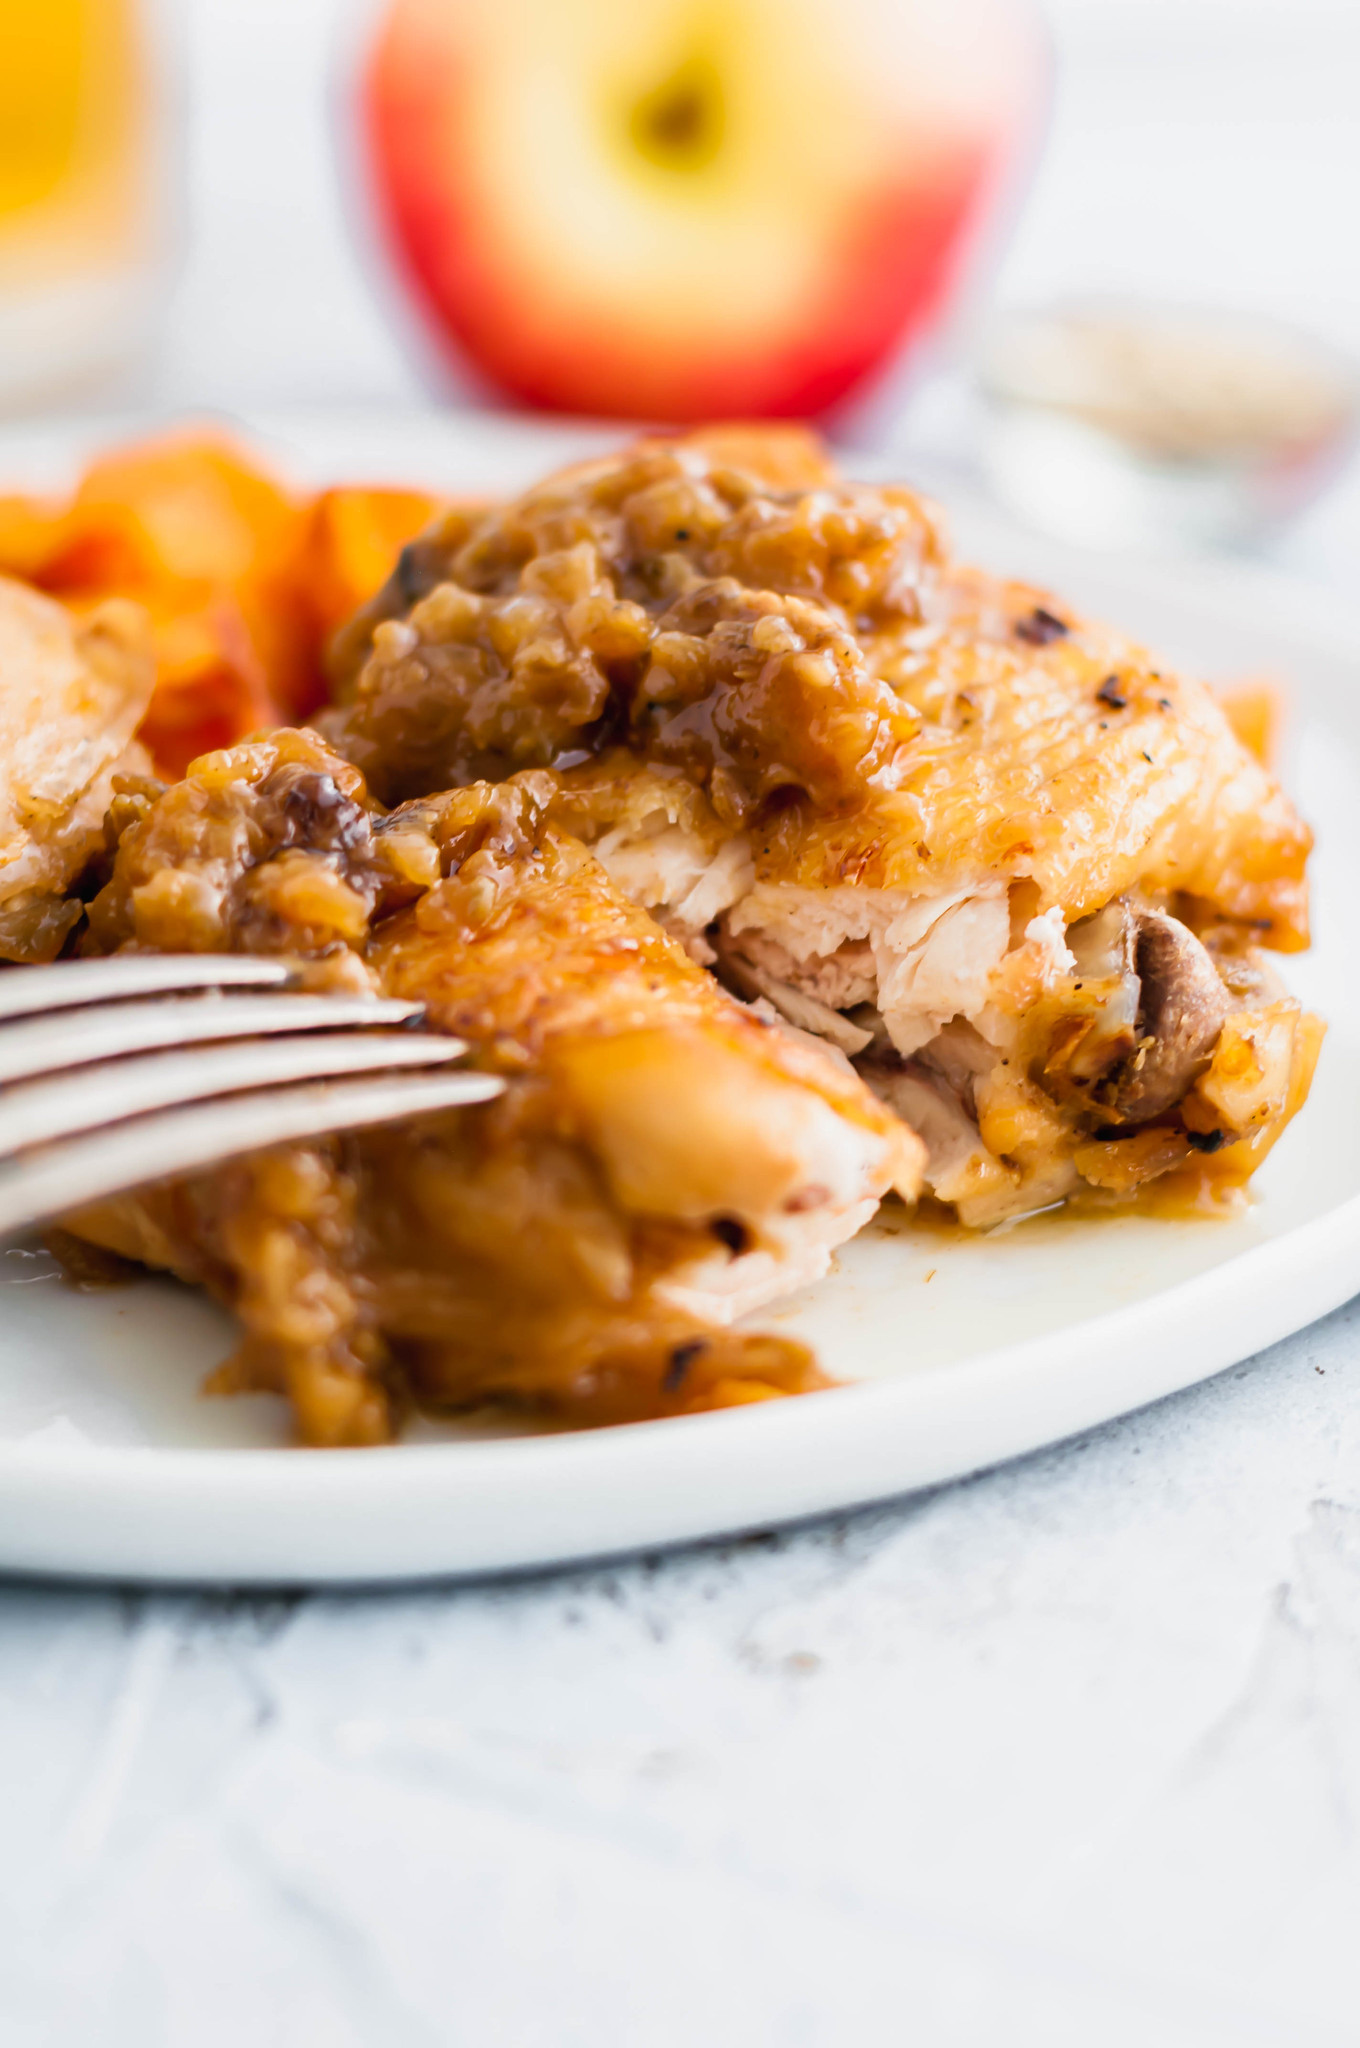 Hard Apple Cider Braised Chicken Thighs are a new fall favorite around here. Simmered in hard apple cider, chicken stock, onion and fennel seeds, this chicken is bursting with all the warm, hearty flavors of fall.